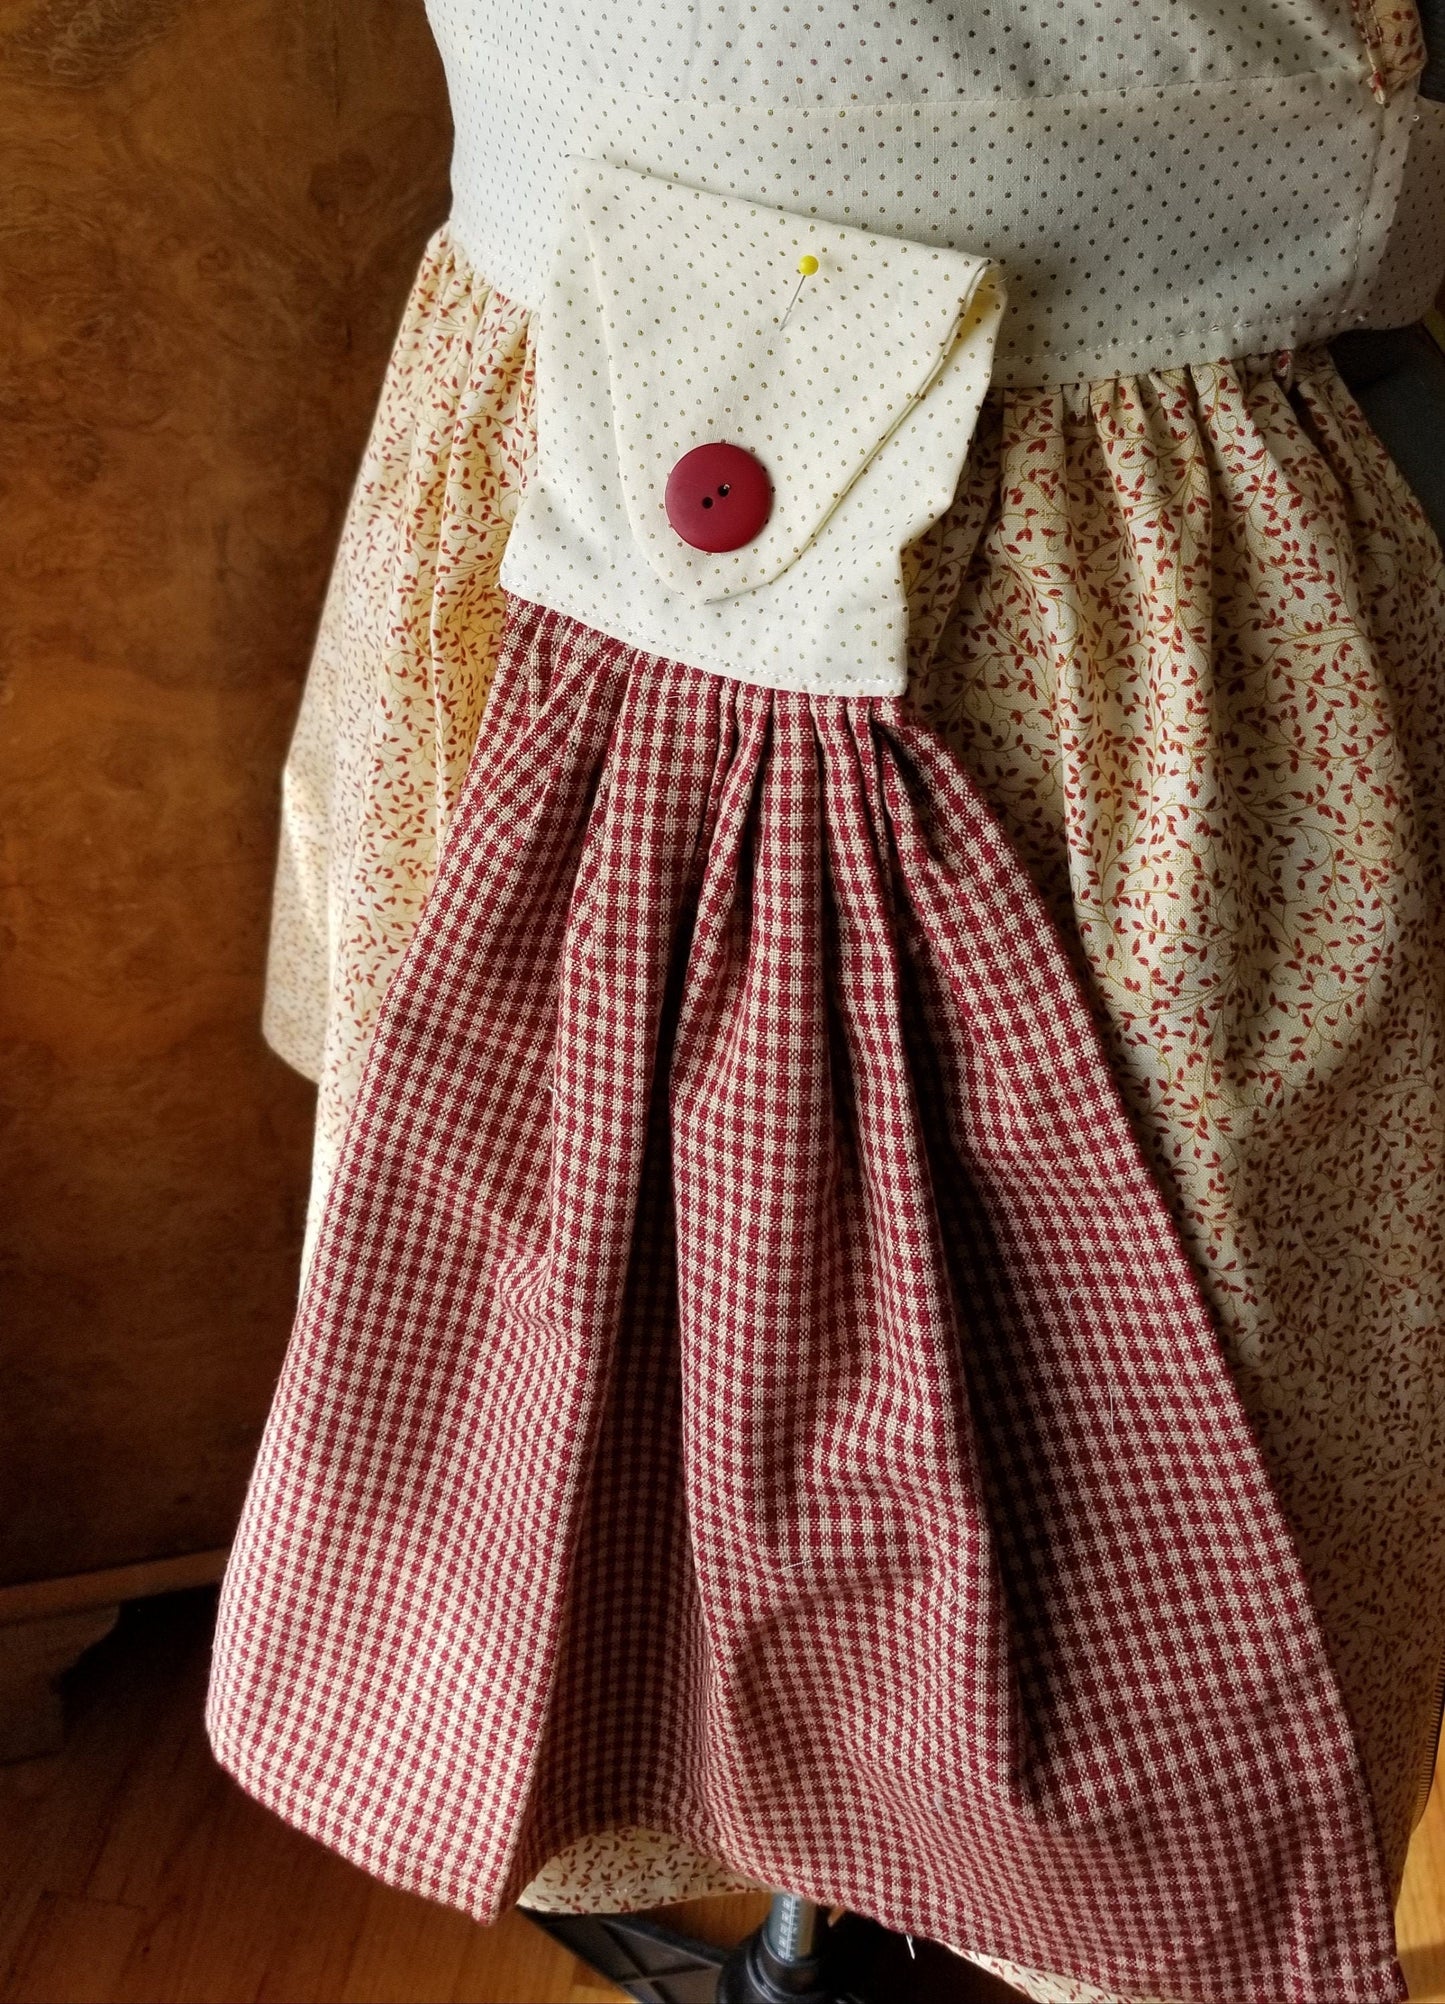 Vintage Style Full Apron with Coordinating Hanging Towel